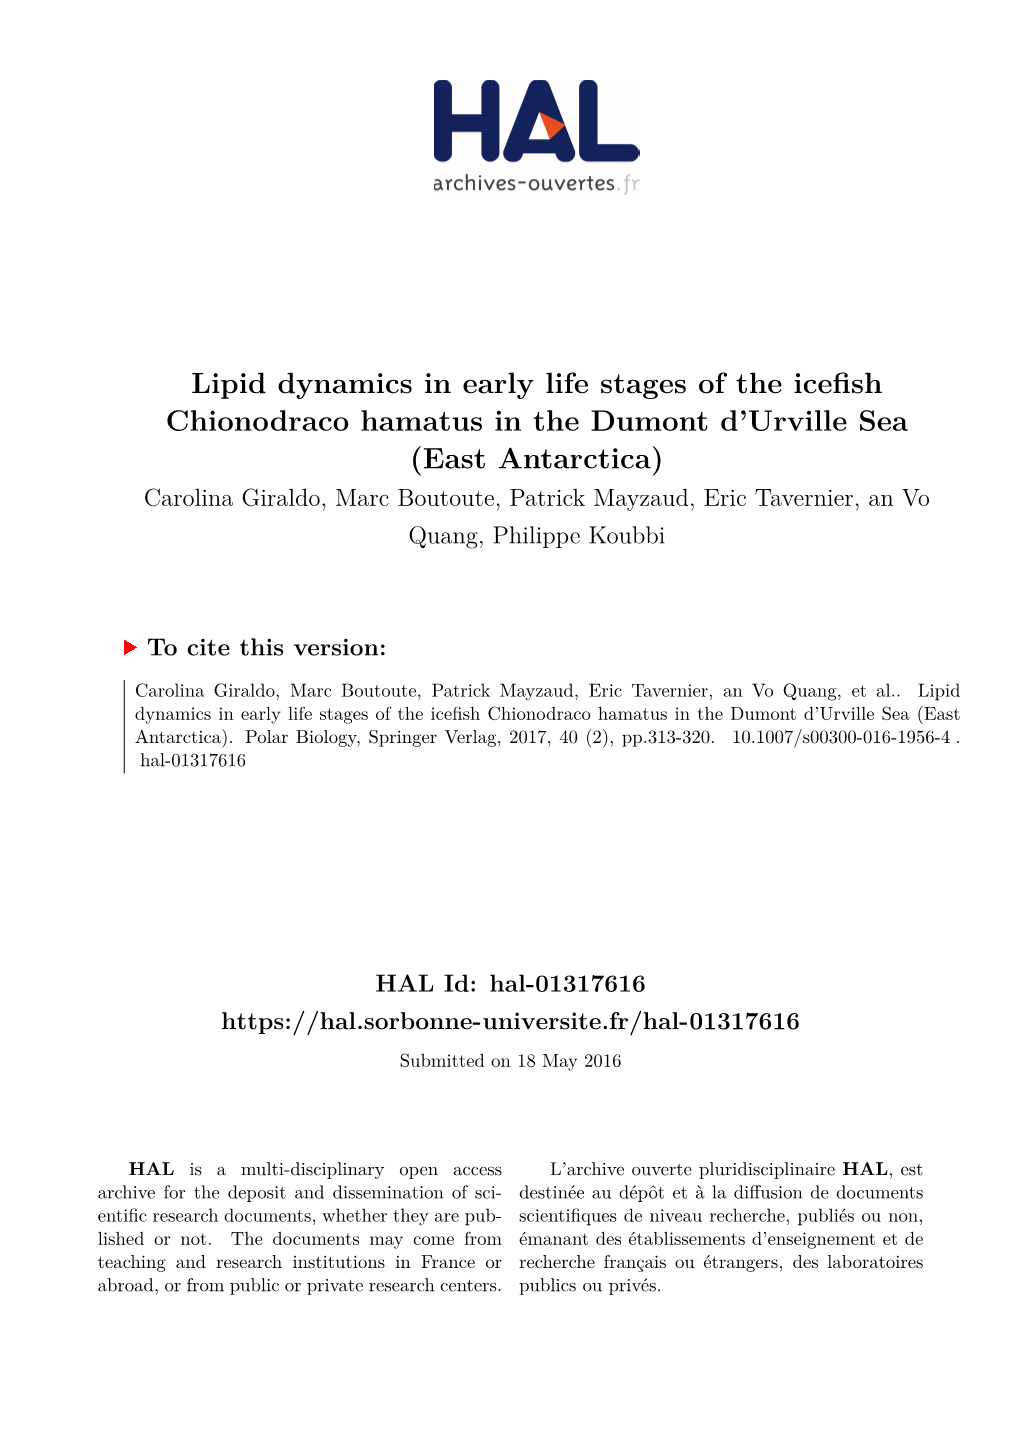 Lipid Dynamics in Early Life Stages of the Icefish Chionodraco Hamatus In